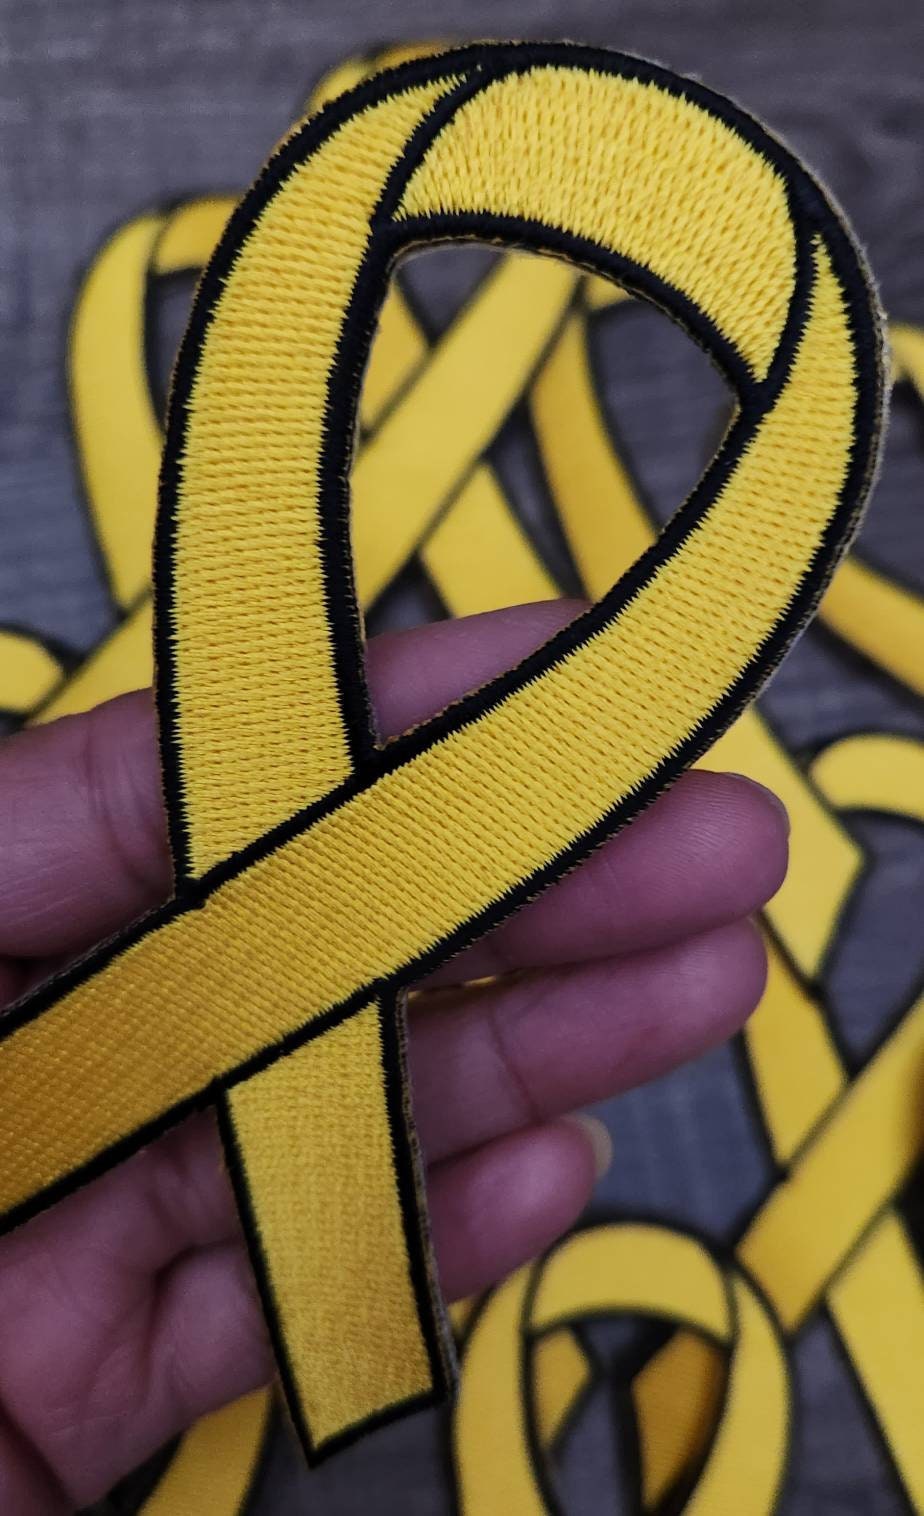 Childhood Cancer "Yellow" Ribbon Patch, Size 5" Embroidered (1 pc) Iron or Sew-on, Cancer  Patch/Applique, Patches for Causes